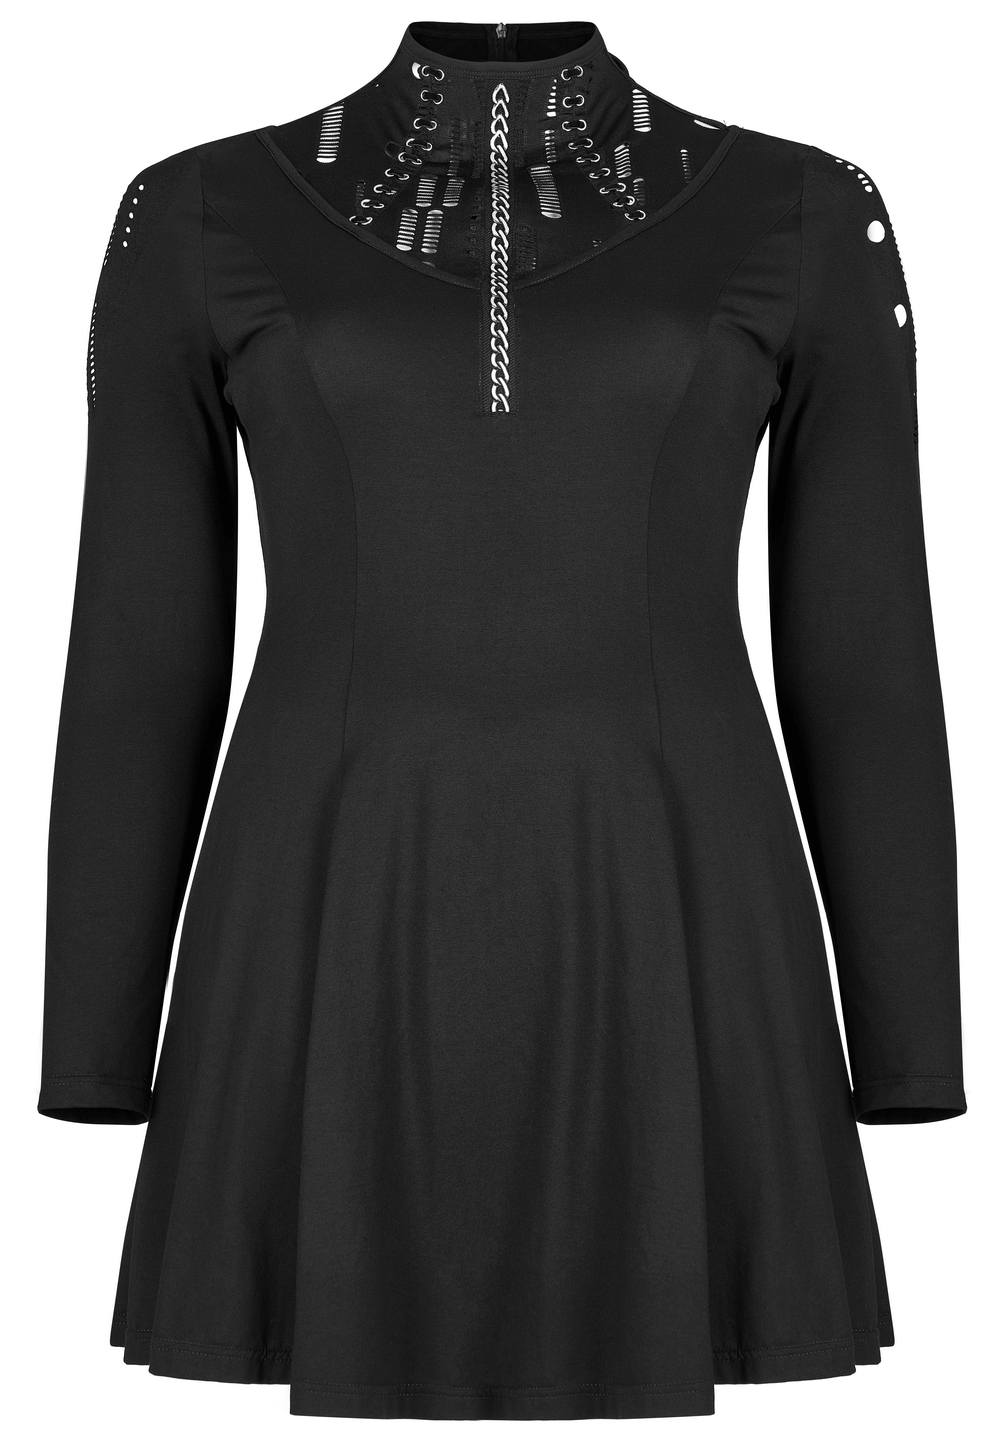 Gothic Skater Dress with Mesh Accents and Chain Print - HARD'N'HEAVY